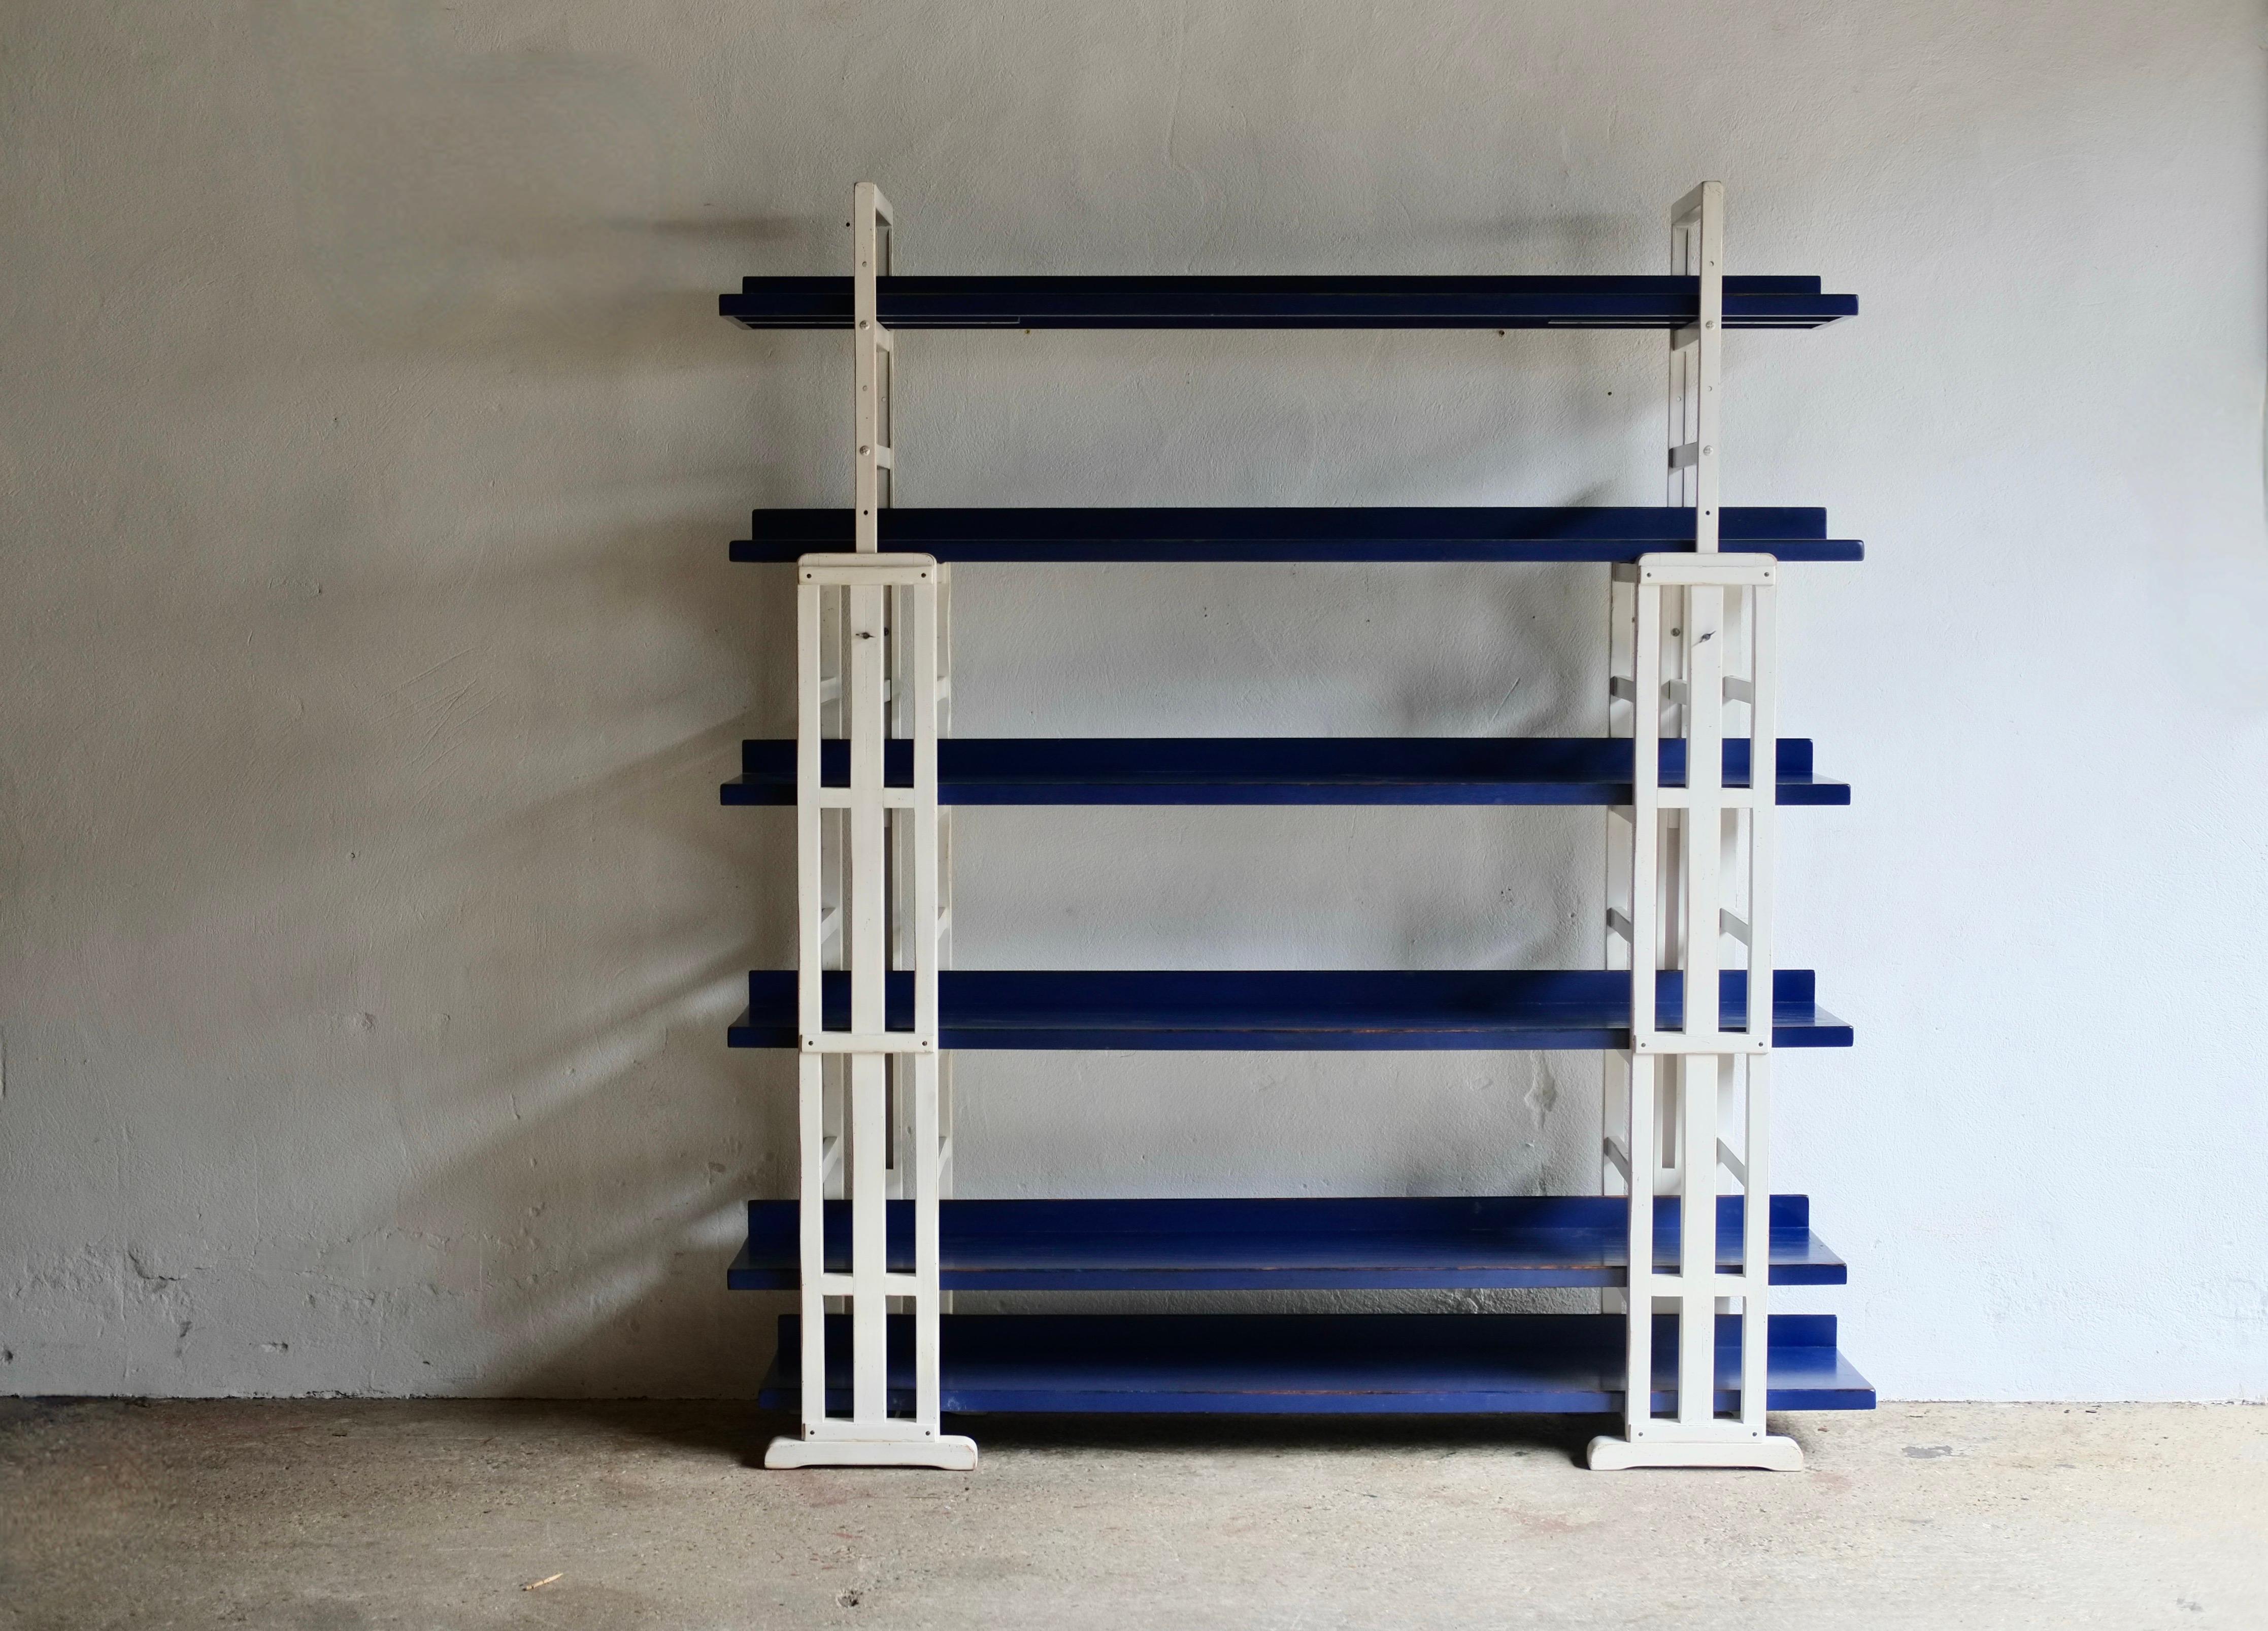 A large wooden shelving unit by French company Roche Bobois. White painted height adjustable frames and blue painted shelves, the unit is reminiscent of the designs of the De Stijl movement from the early 20th century. 

In good solid vintage